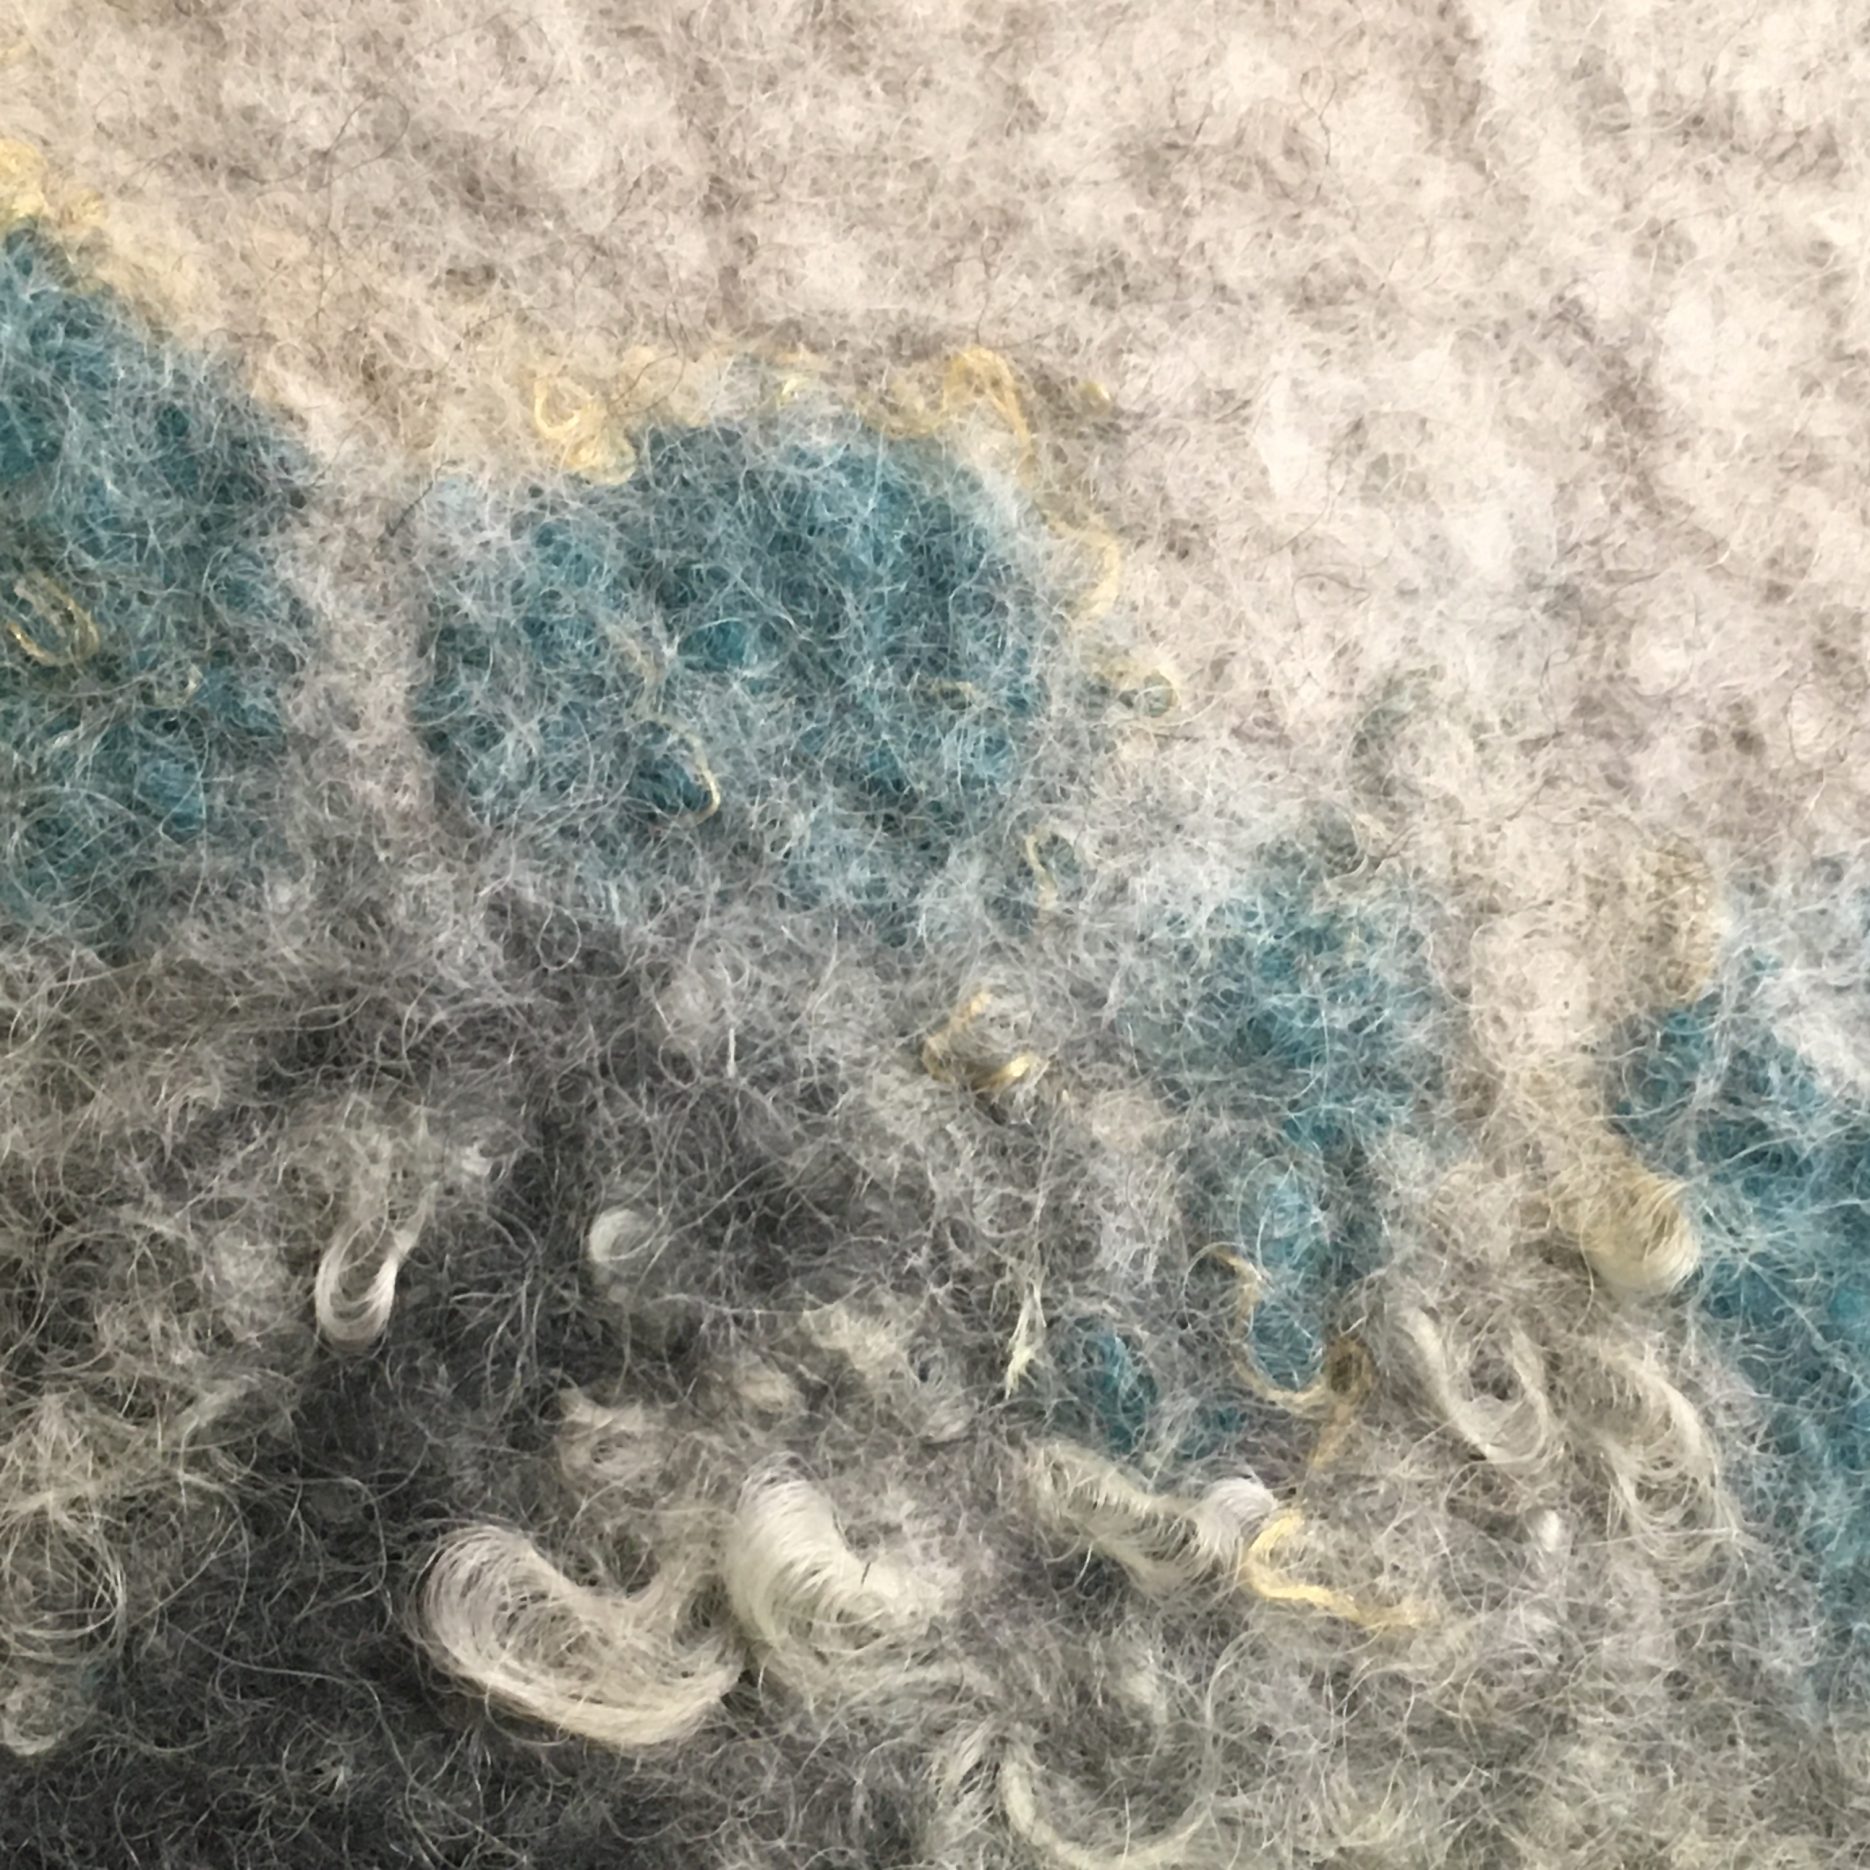 Detail of wet felted bag, showing gradation from dark to light gray, lower left to upper right, with teal, gold and silver accents